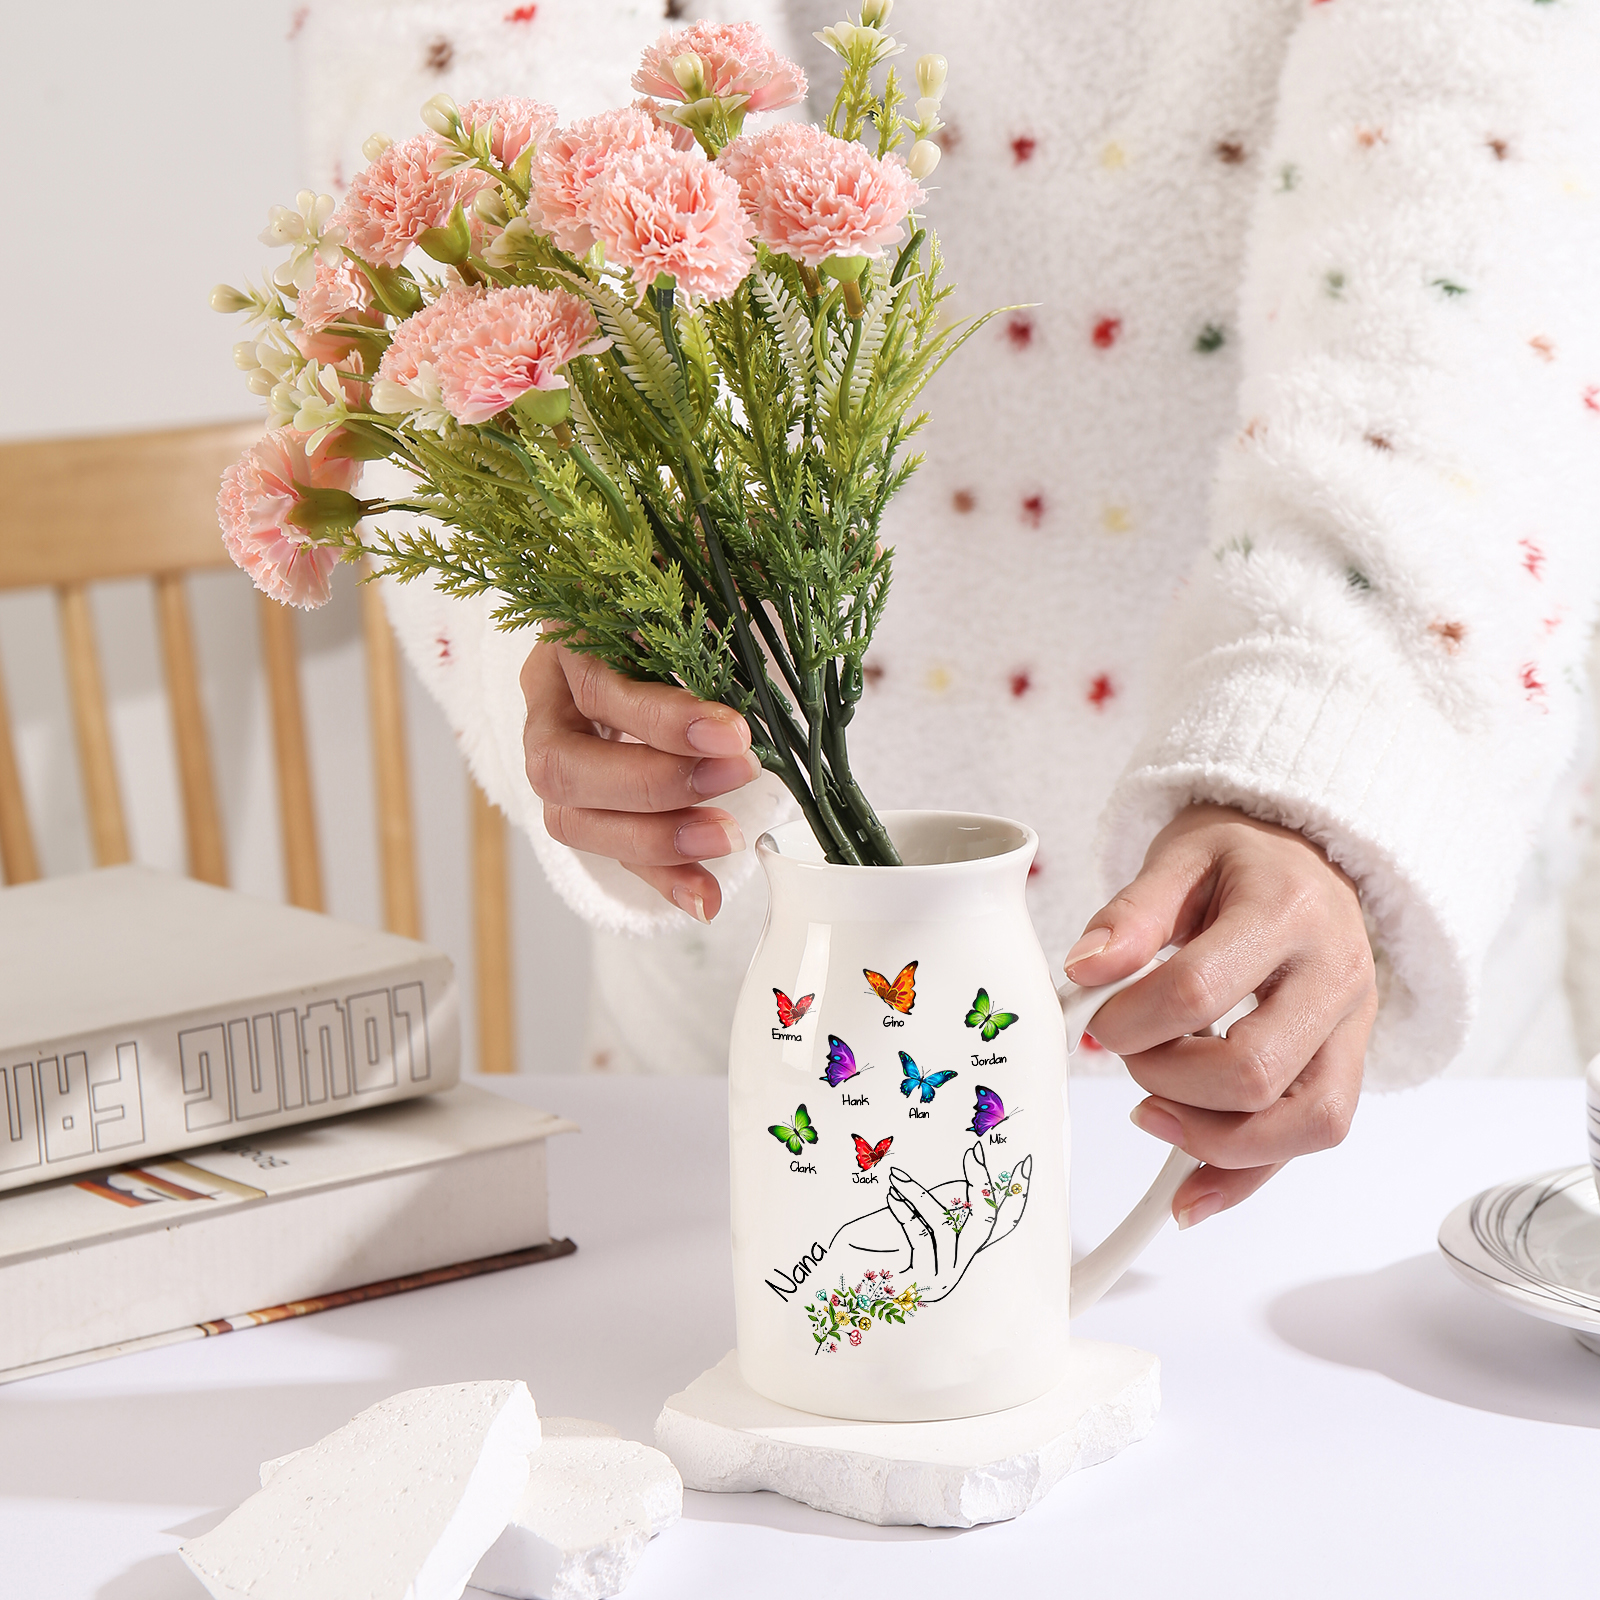 8 Names - Personalized Exquisite Flower Hand Butterfly Style Ceramic Cup With Customizable Names As a Special Gift For Nana/Mom